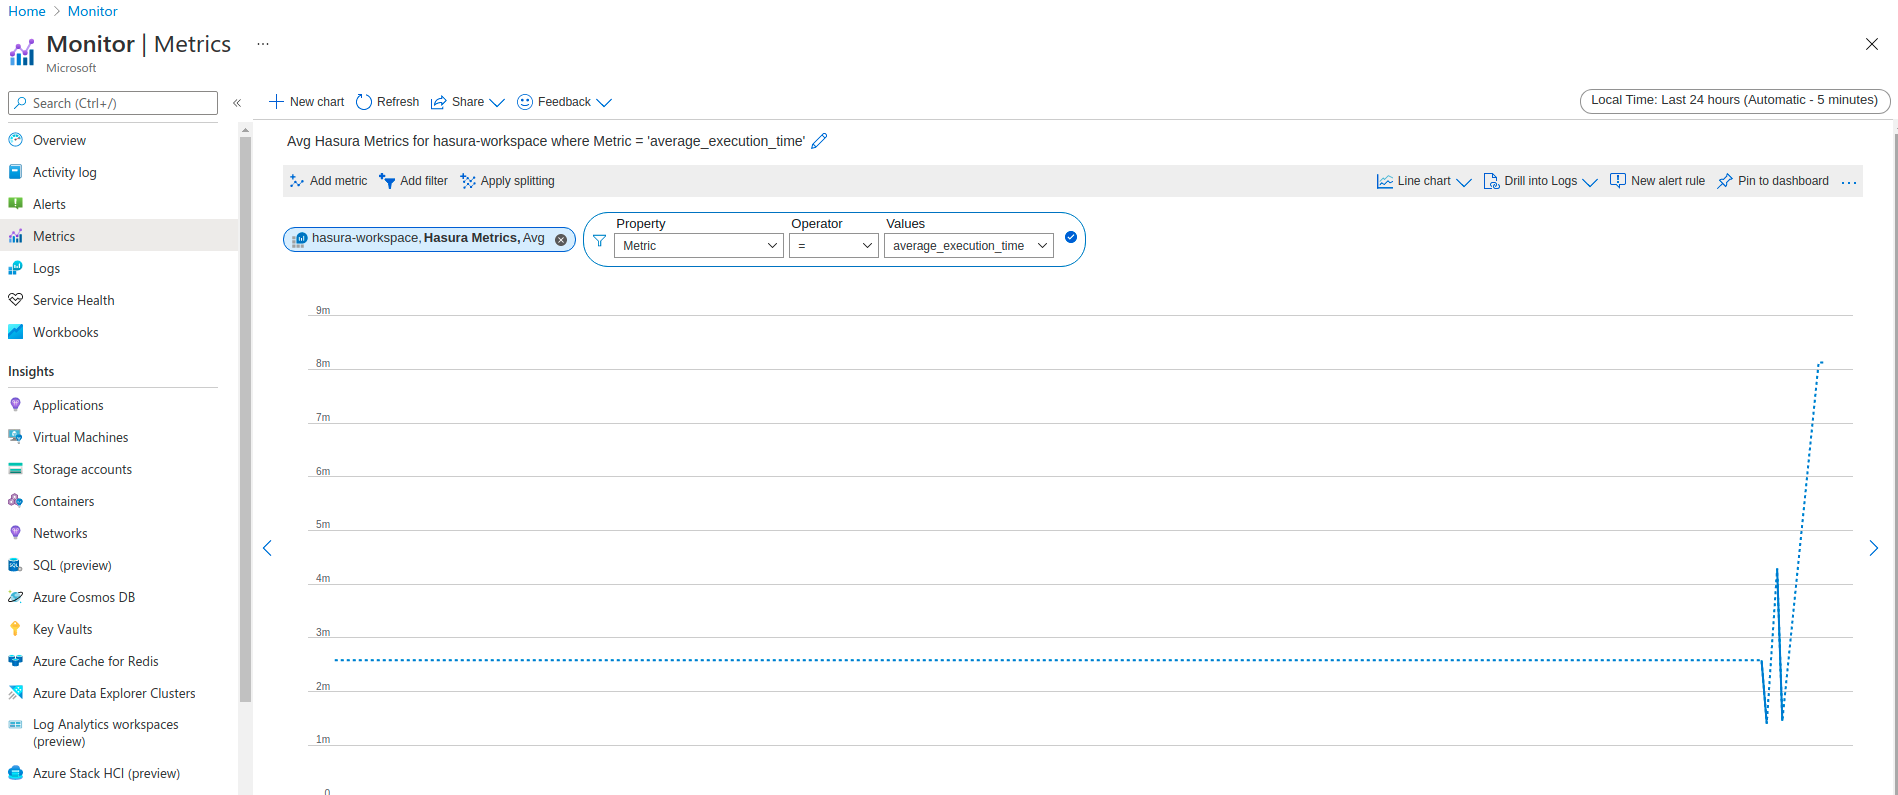 Metrics successfully exported to Azure monitor